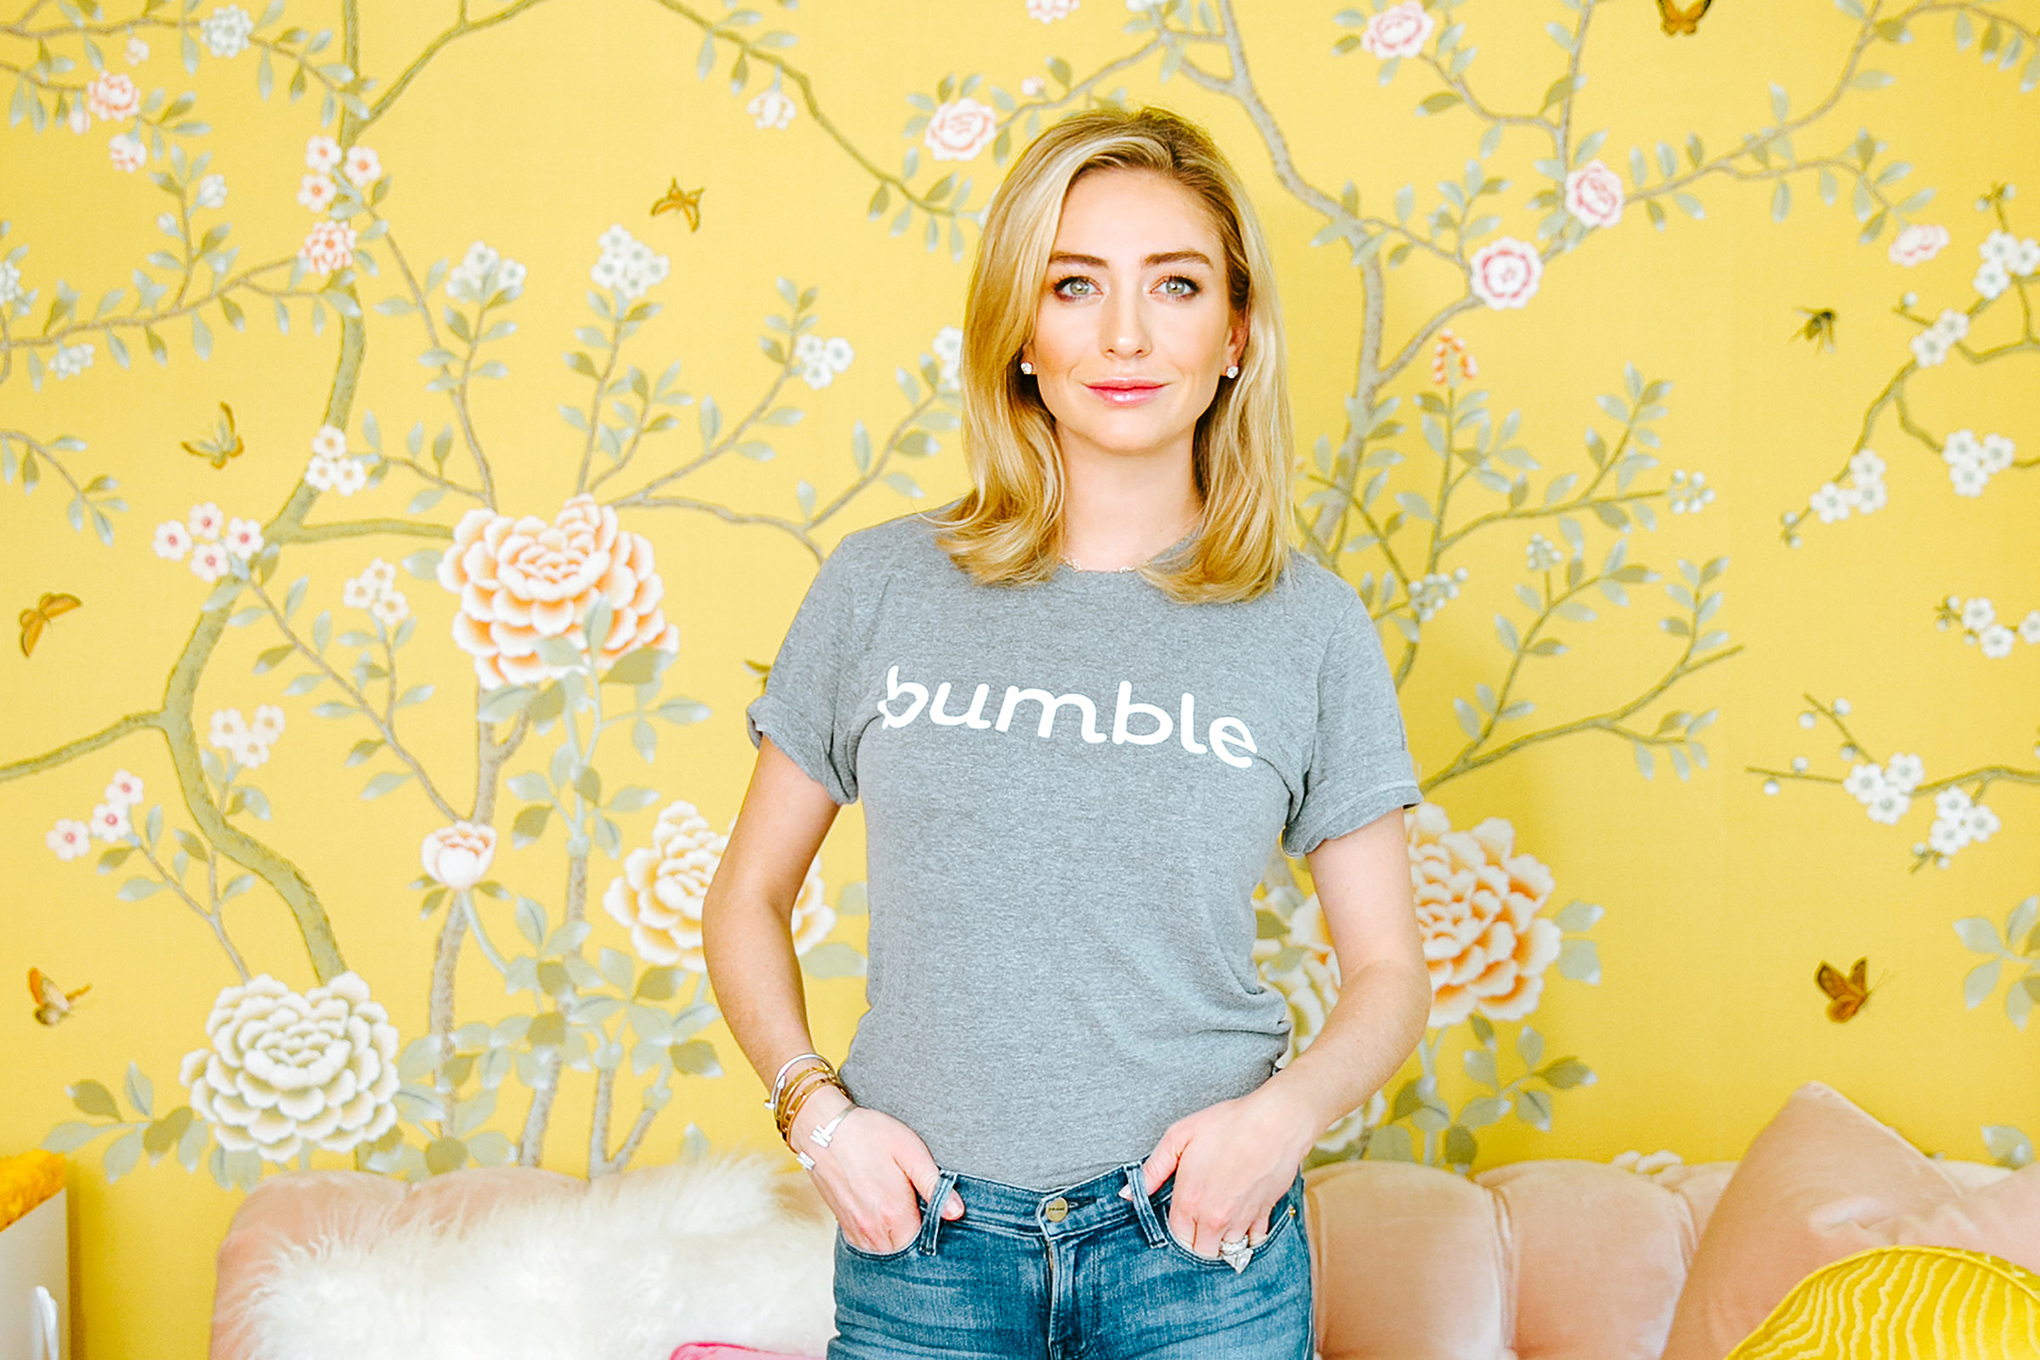 whitney-wolfe-bumble-ceo